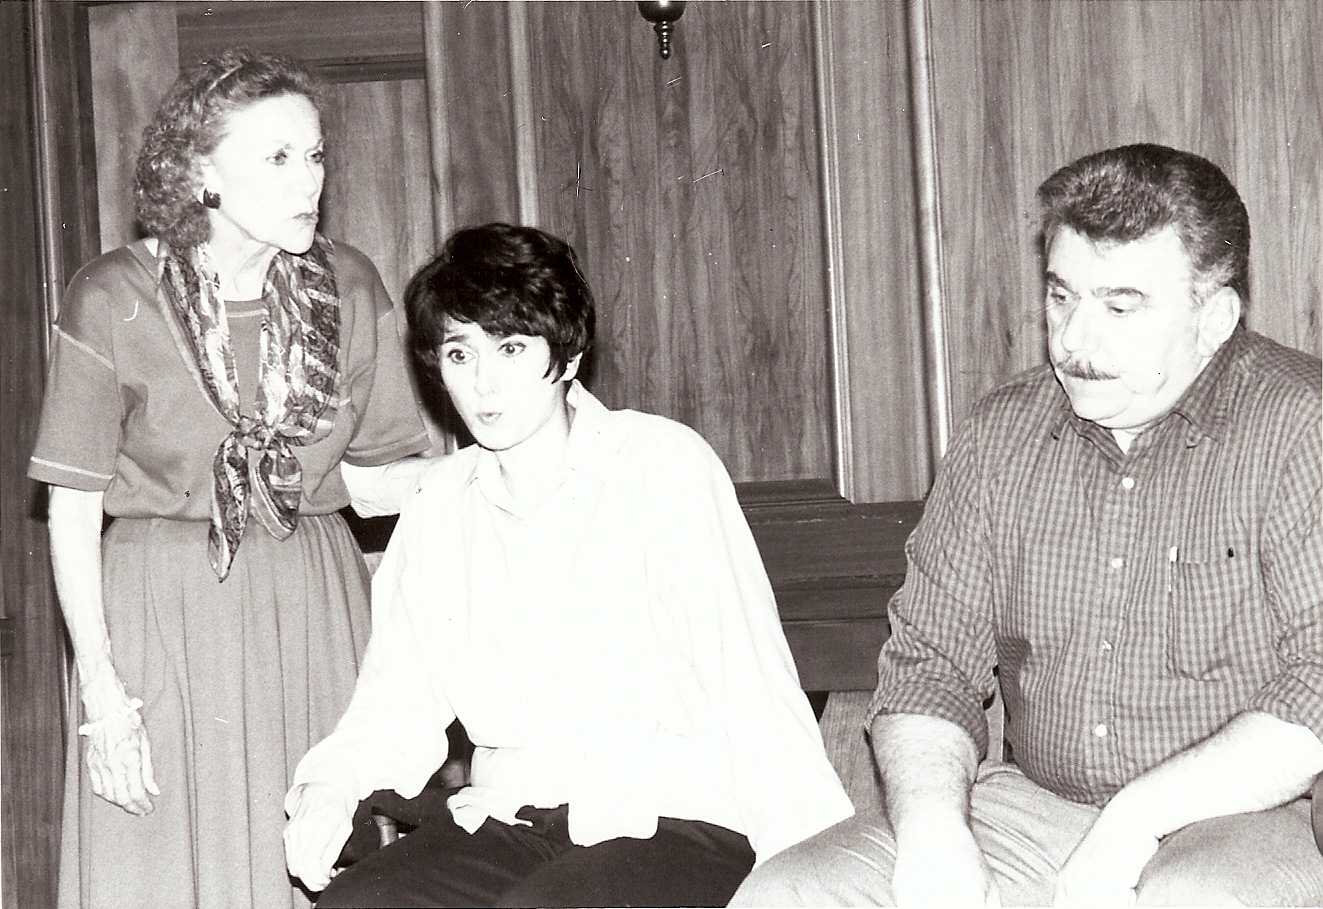 With Norman Mathis and Mary Jane Schaefer, in a scene from John Guar's 